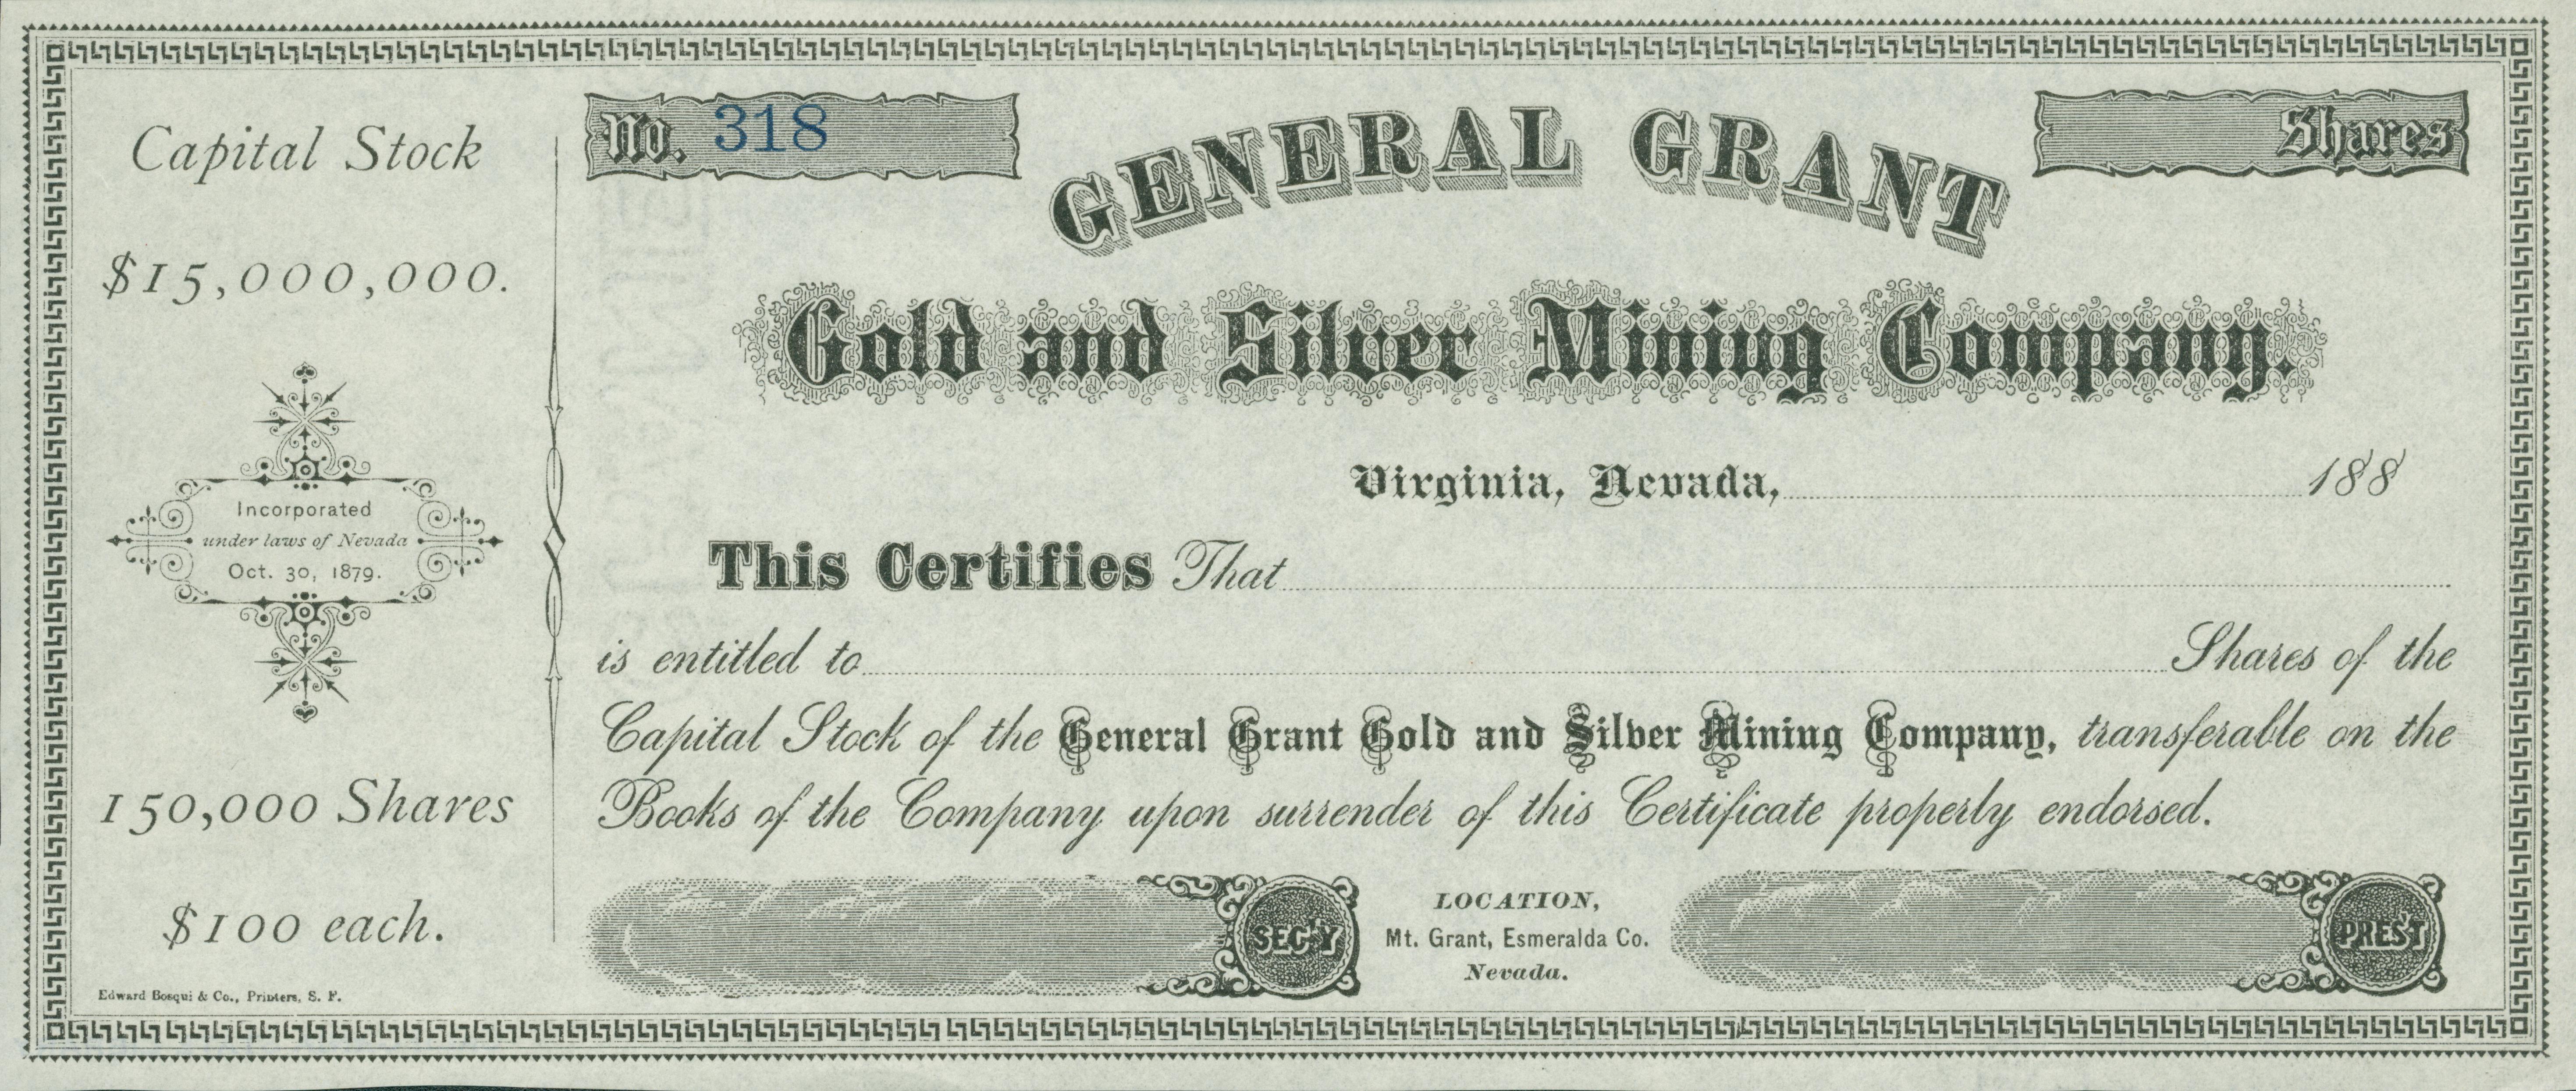 Blank Certificate, No. 318.  .Edward Bosqui & Co., Printers, S. F.
(Edited to Mining from Stocks and Bonds, February 8, 2017)